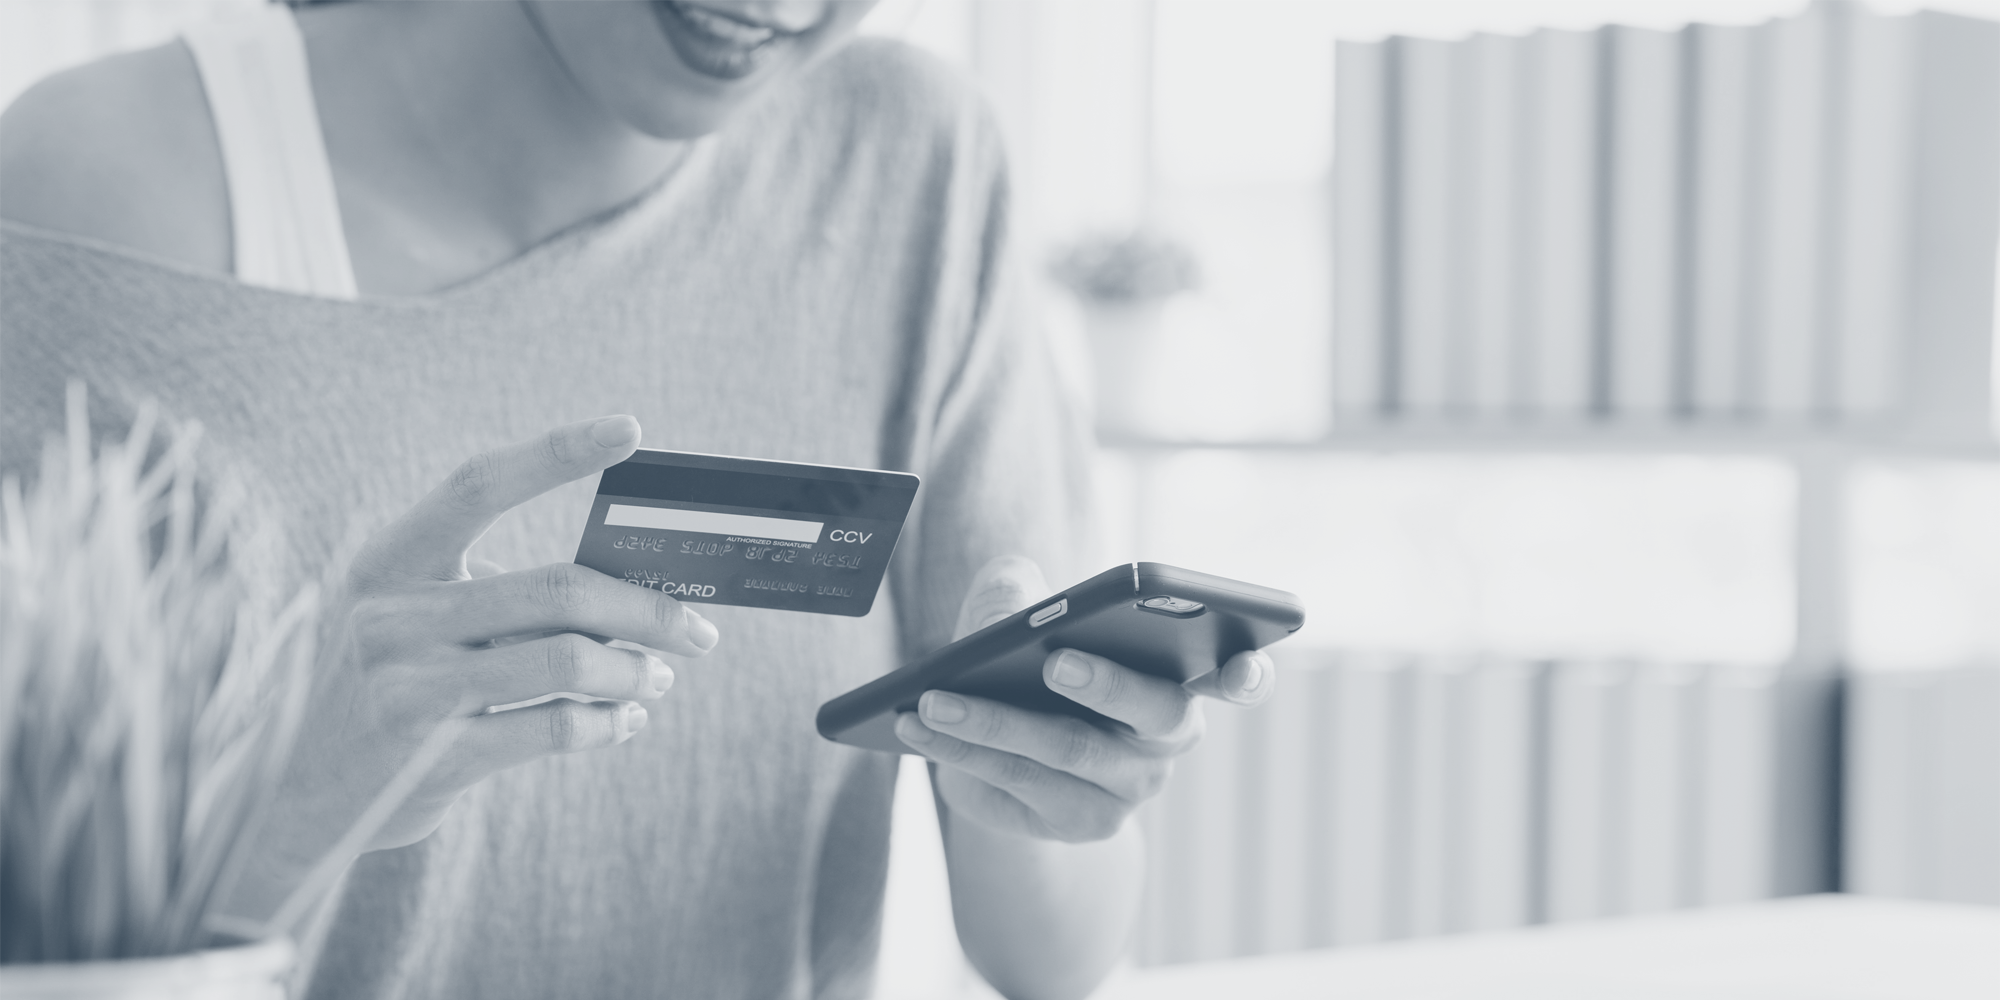 From credit cards to PayPal: Comparing the security of online payment methods